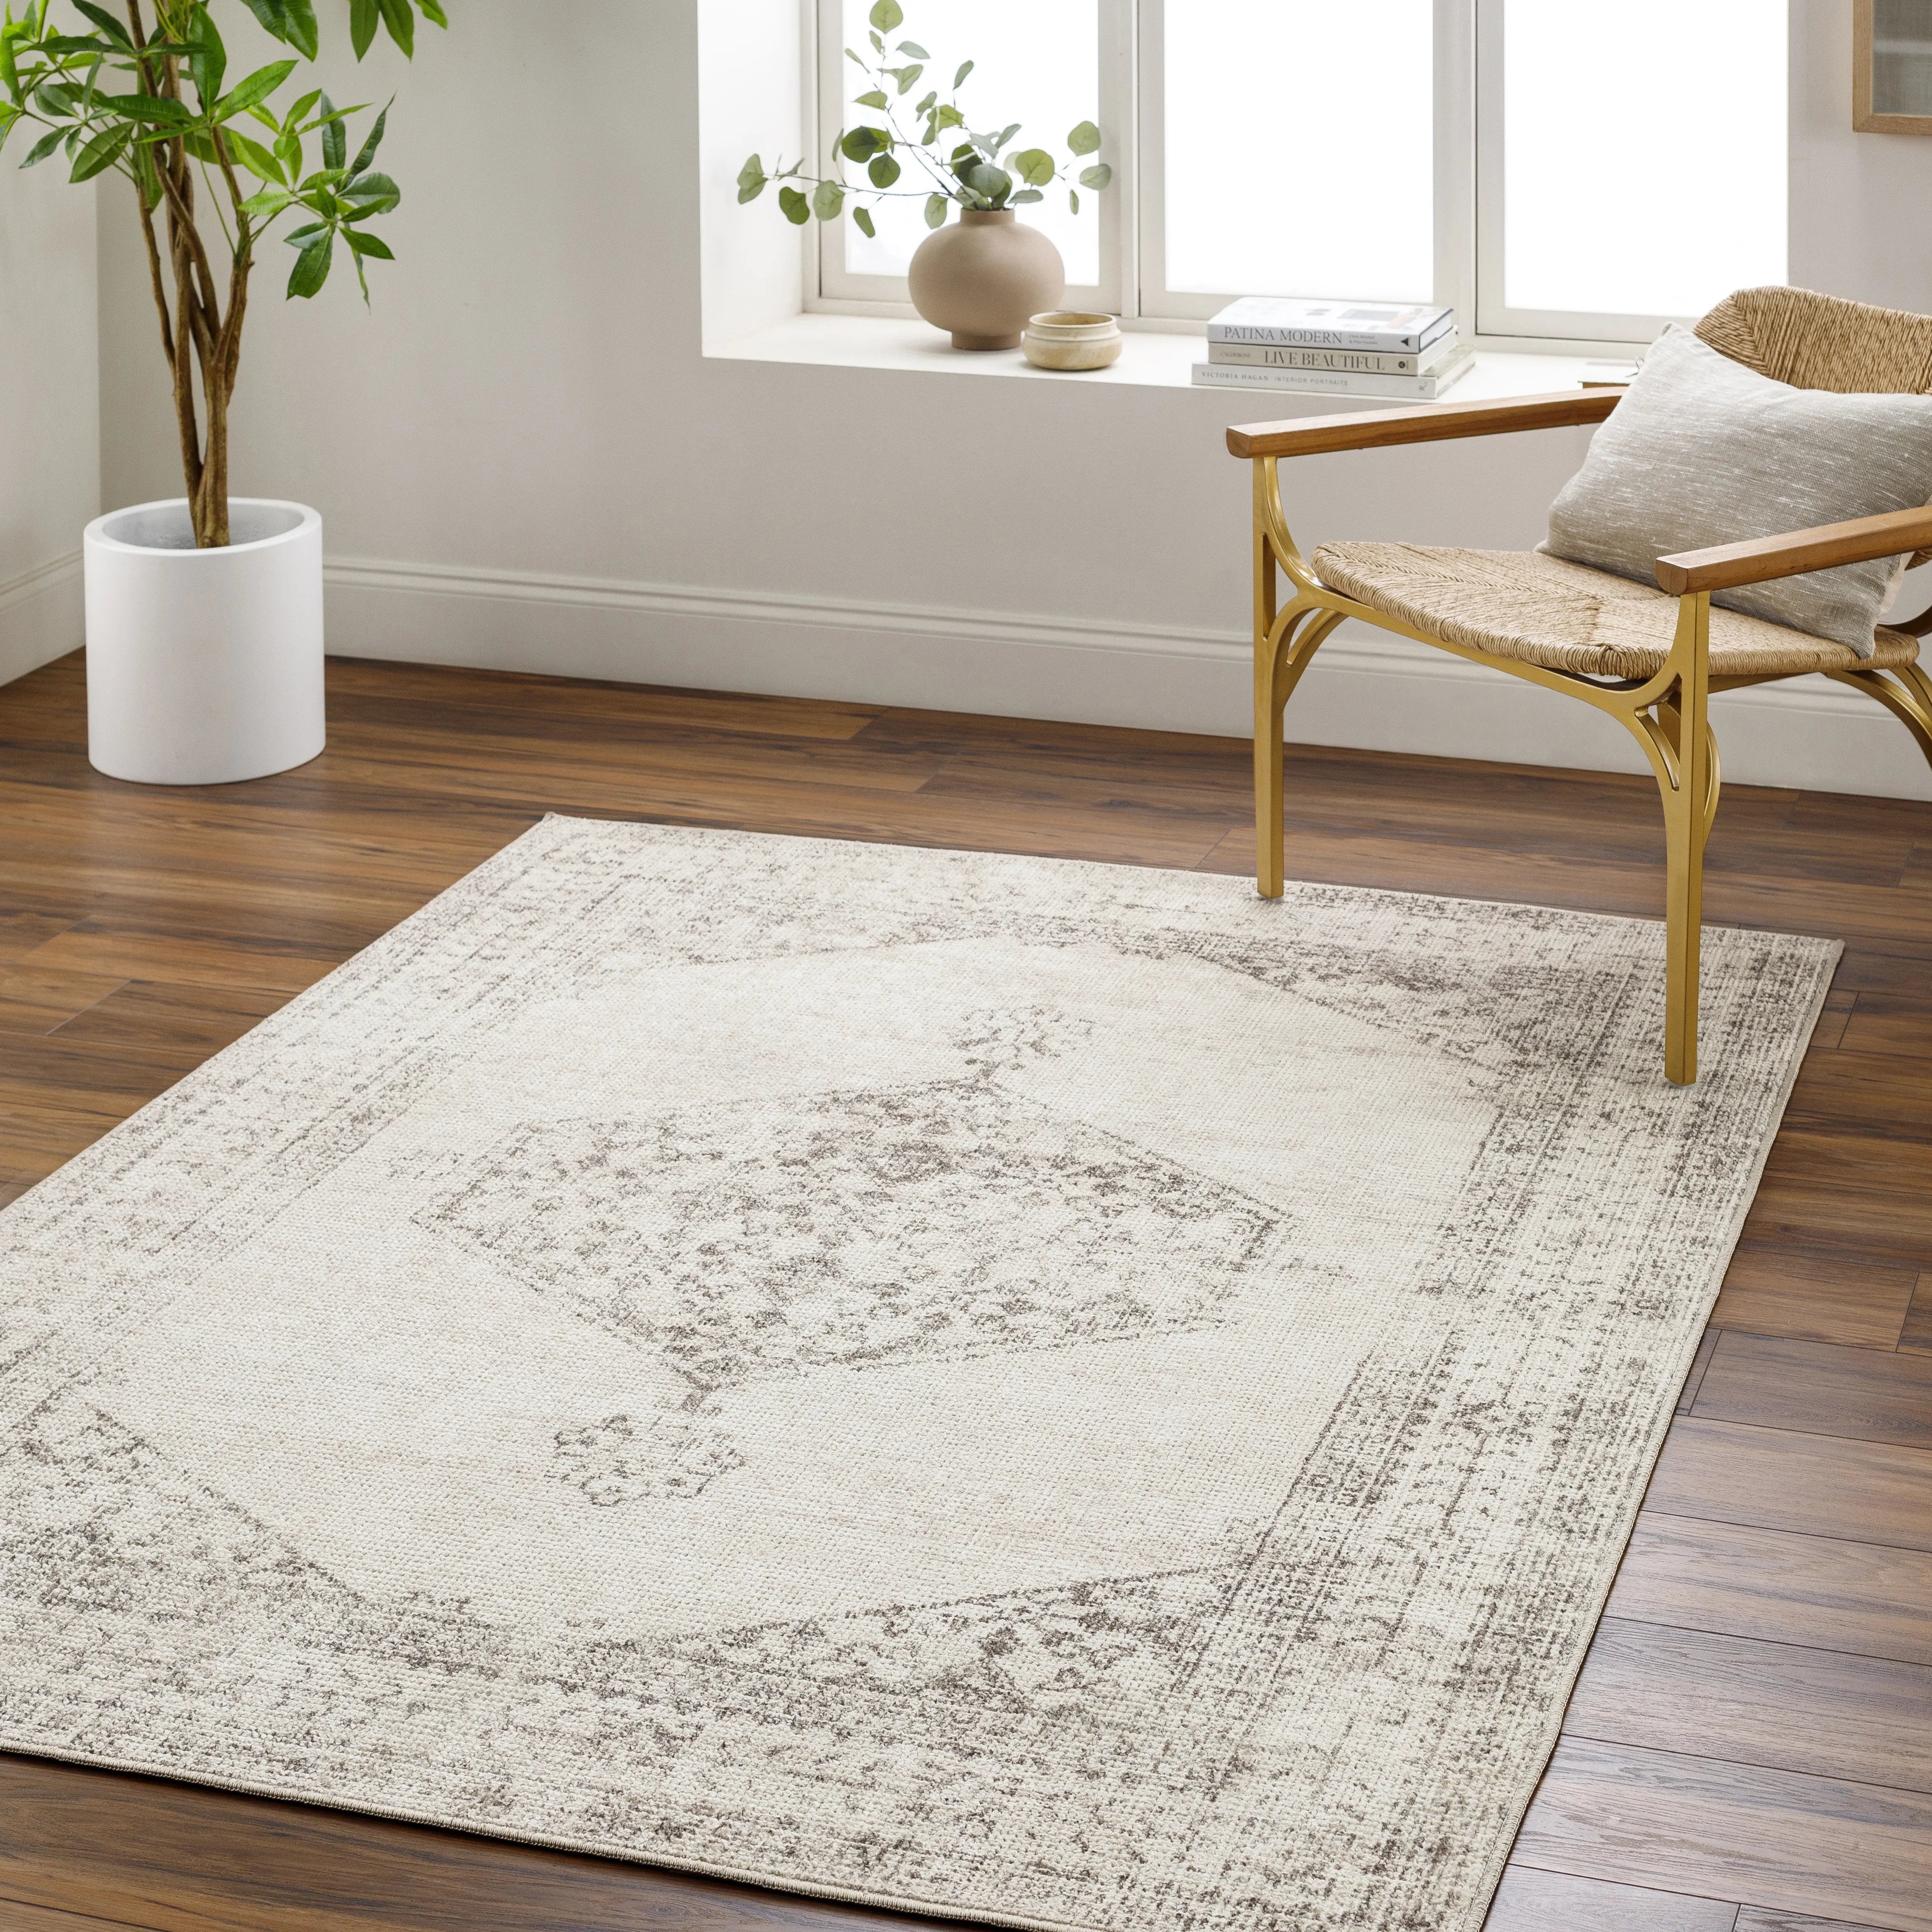 PNW Home x Surya available at Amethyst Home shipping to Australia, UK, and Canada. Organic modern design with easy to clean rugs for a family home in  the San Diego metro area.